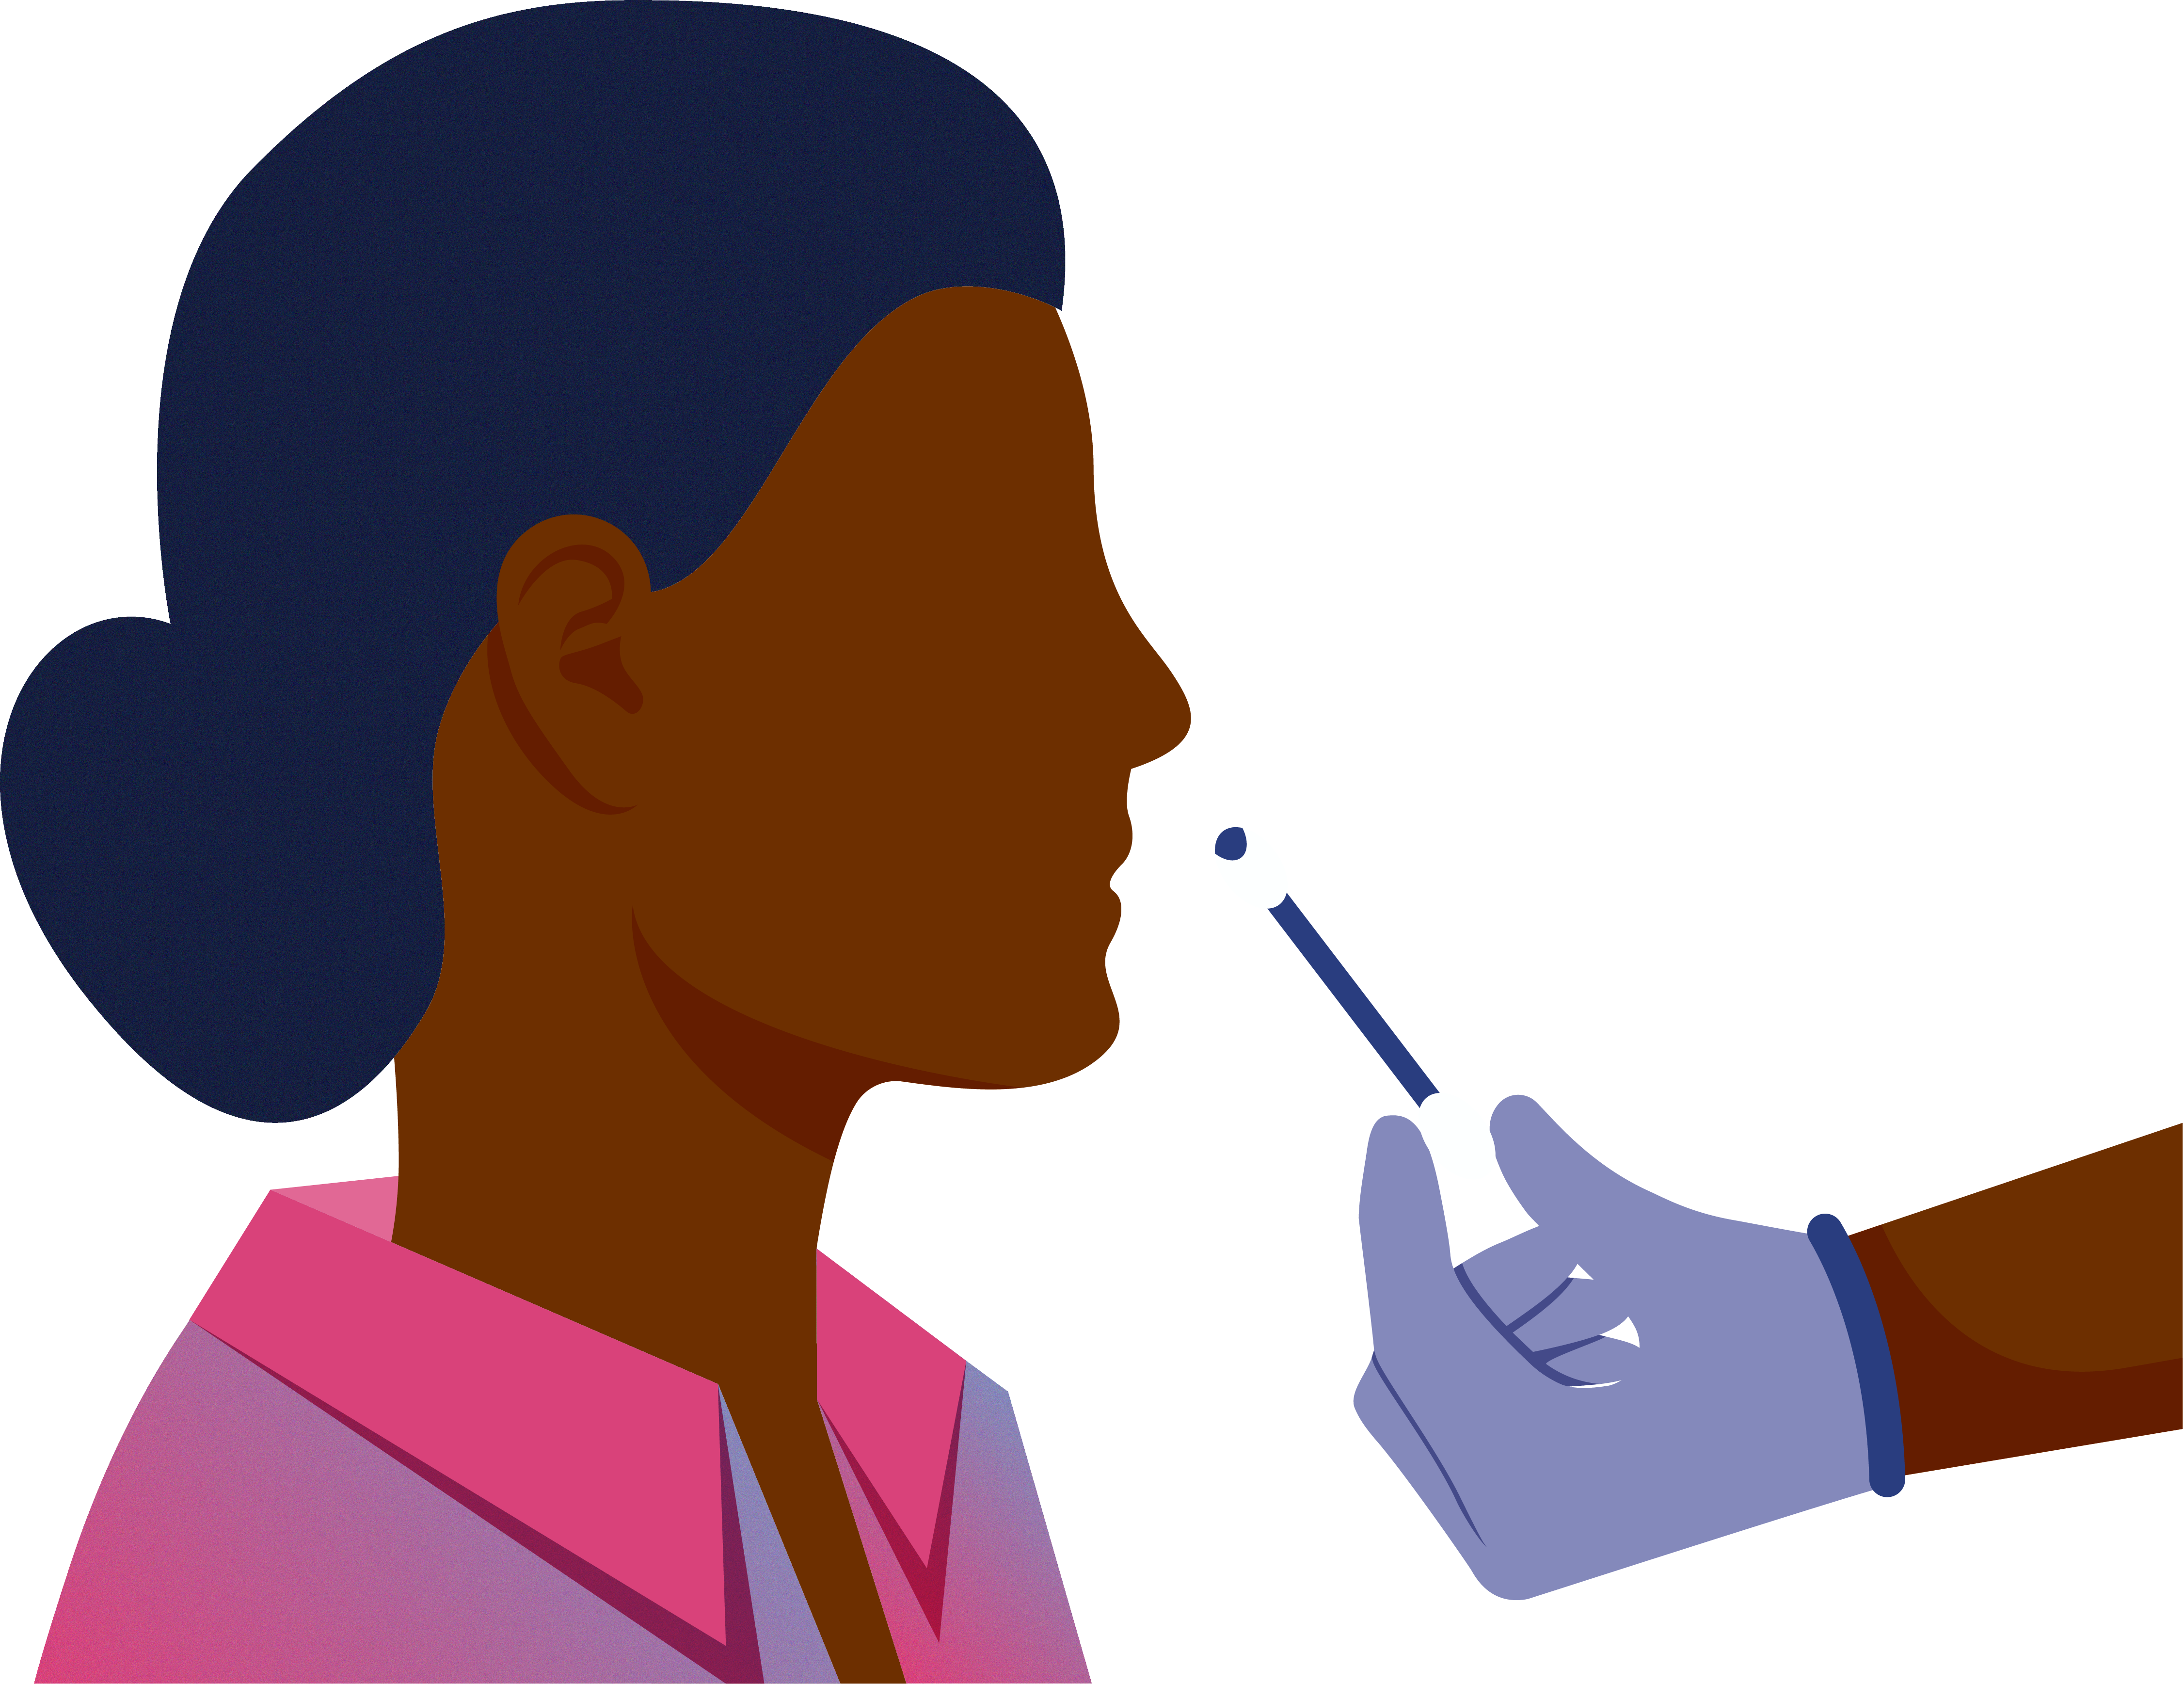 Illustration of a person receiving a COVID-19 nasal swab test from a gloved hand